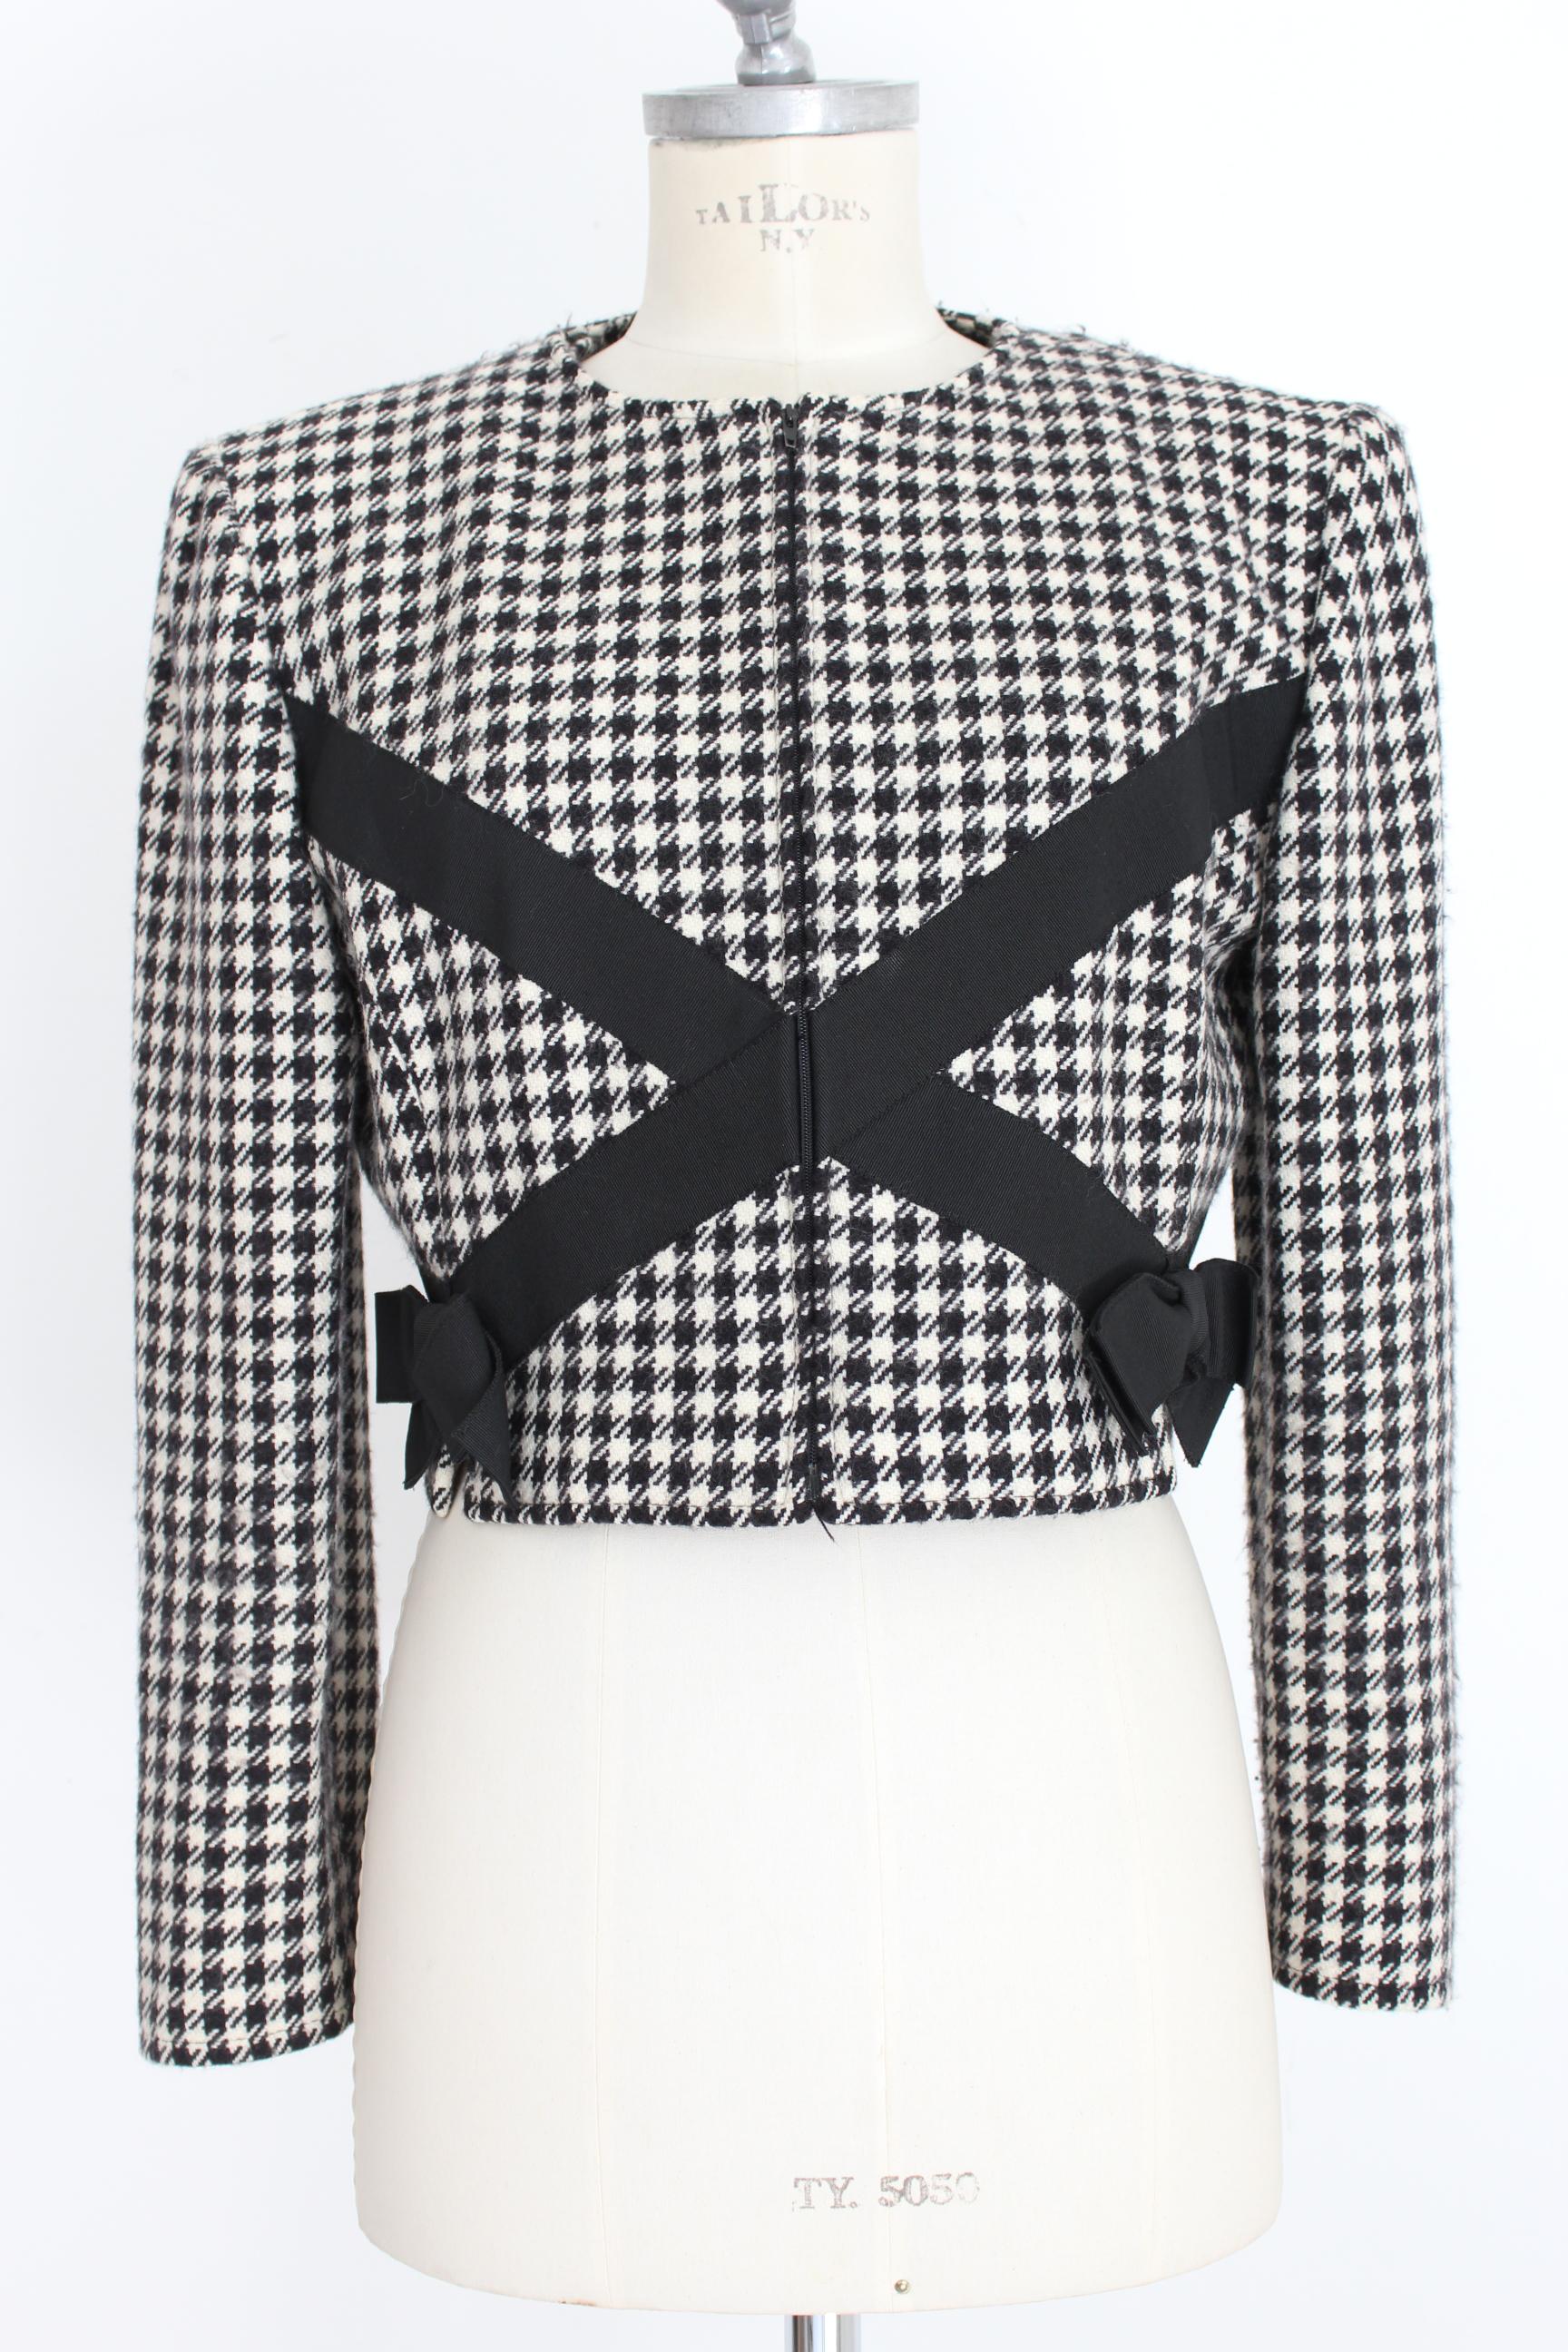 Women's Valentino Boutique Black White Wool Houndstooth Evening Skirt Suit 1980s